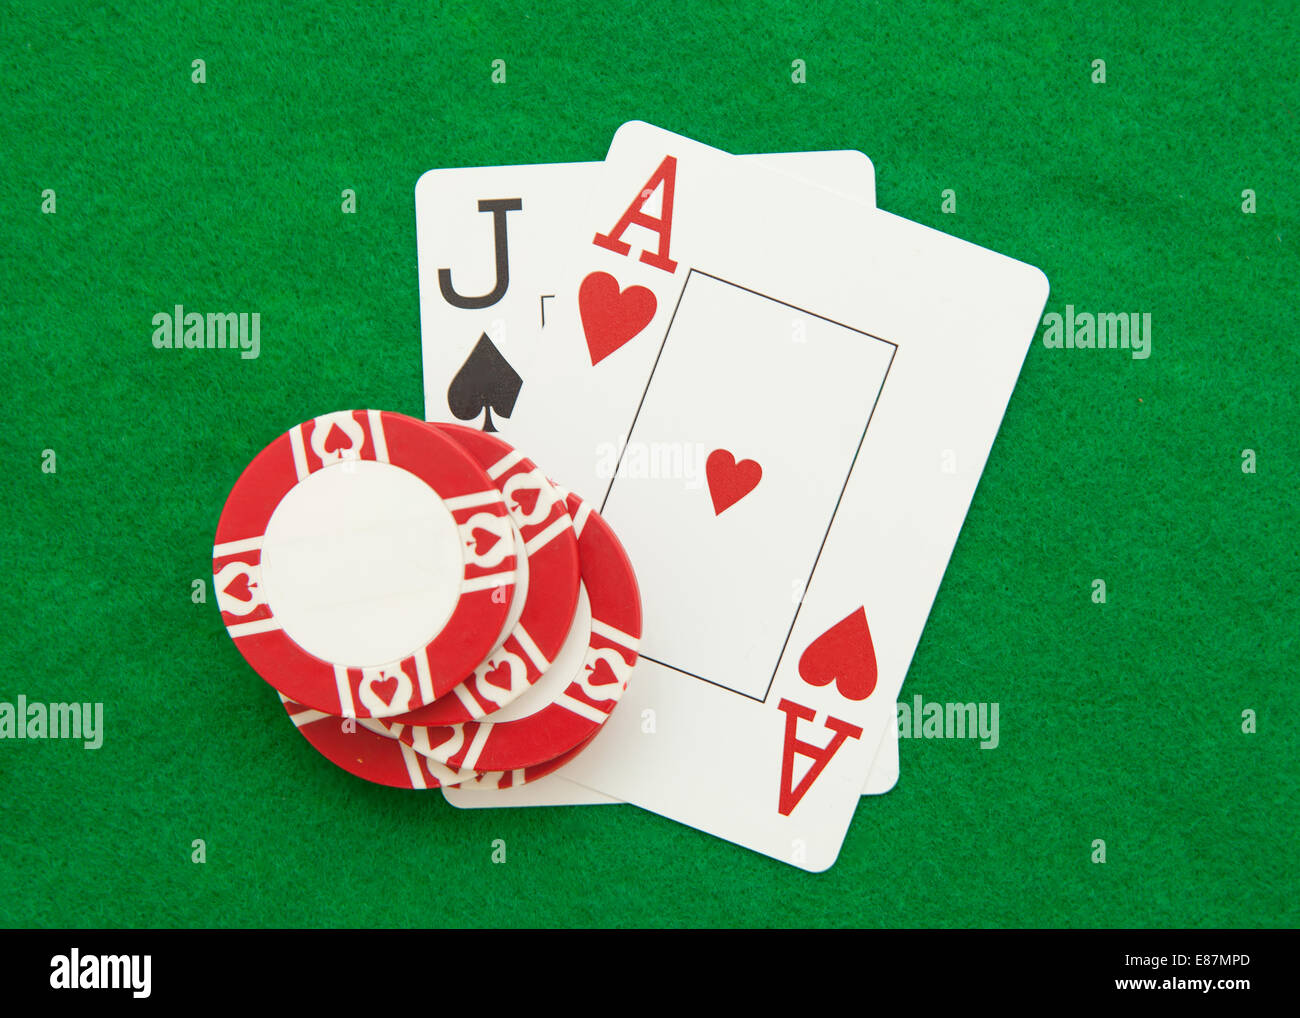 Blackjack hand with casino chip on green casino table Stock Photo